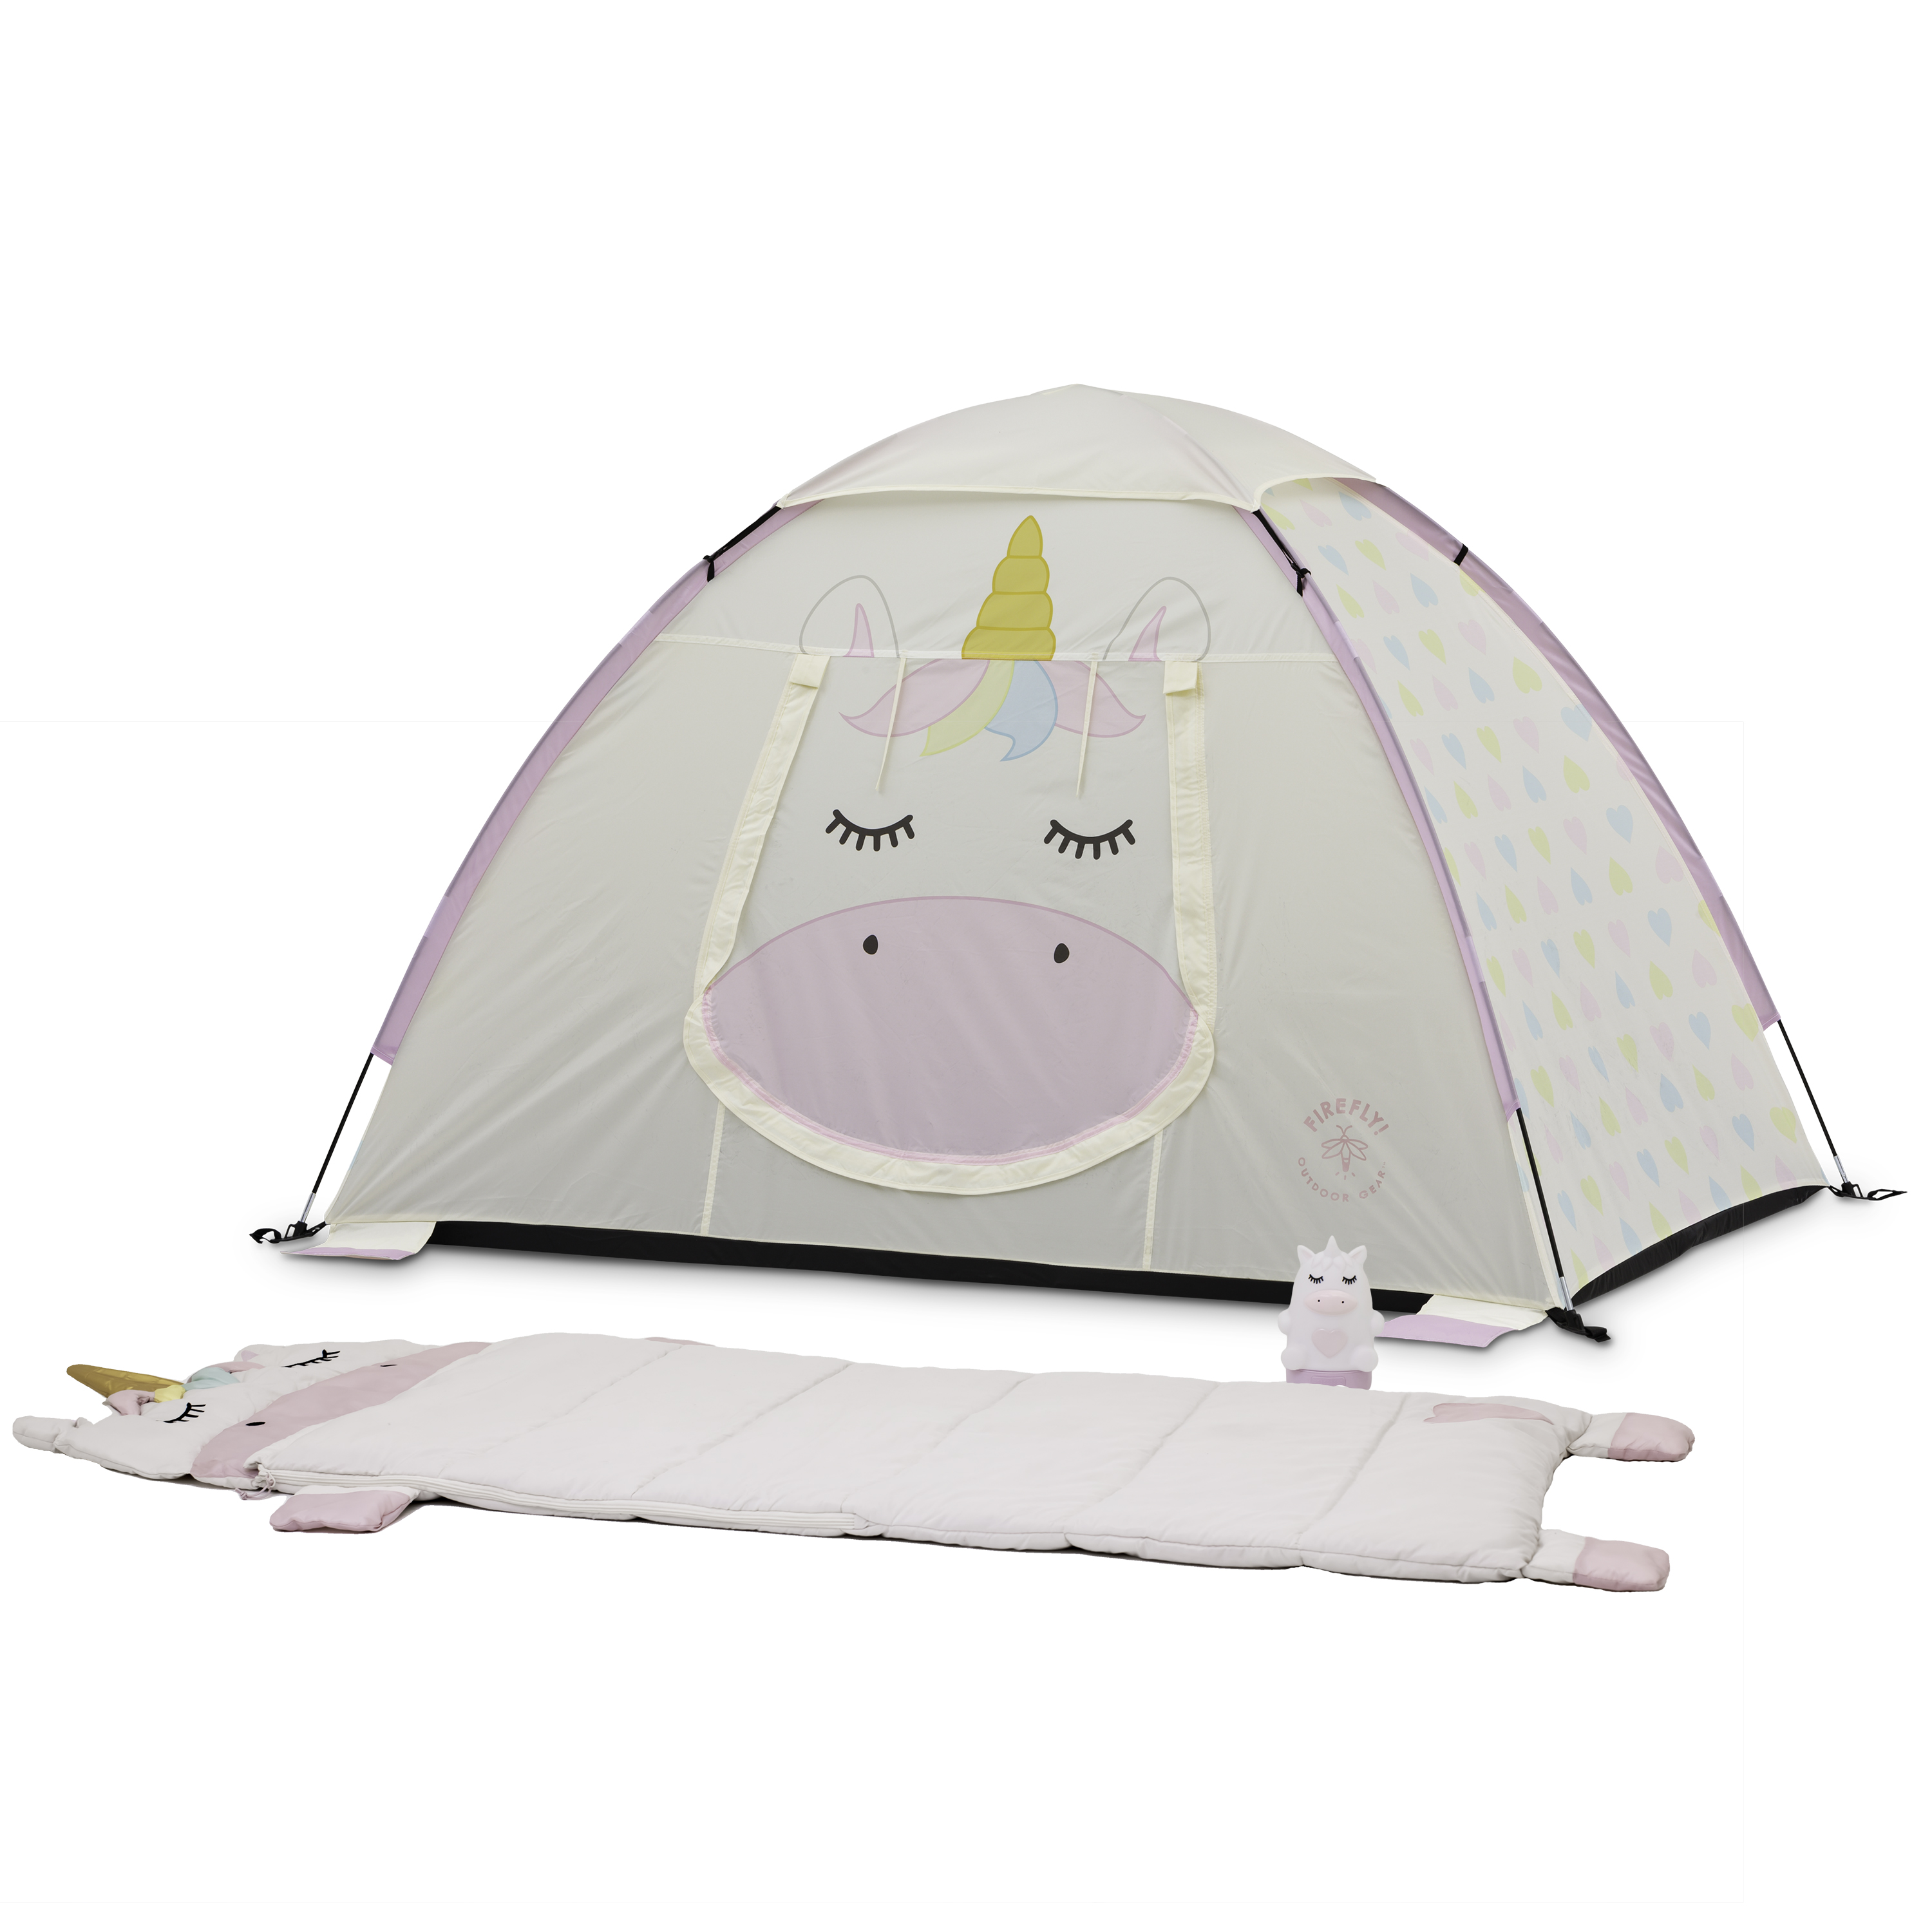 Firefly! Outdoor Gear Sparkle the Unicorn Kid's Camping Combo (One-room Tent, Sleeping Bag, Lantern) - image 1 of 28